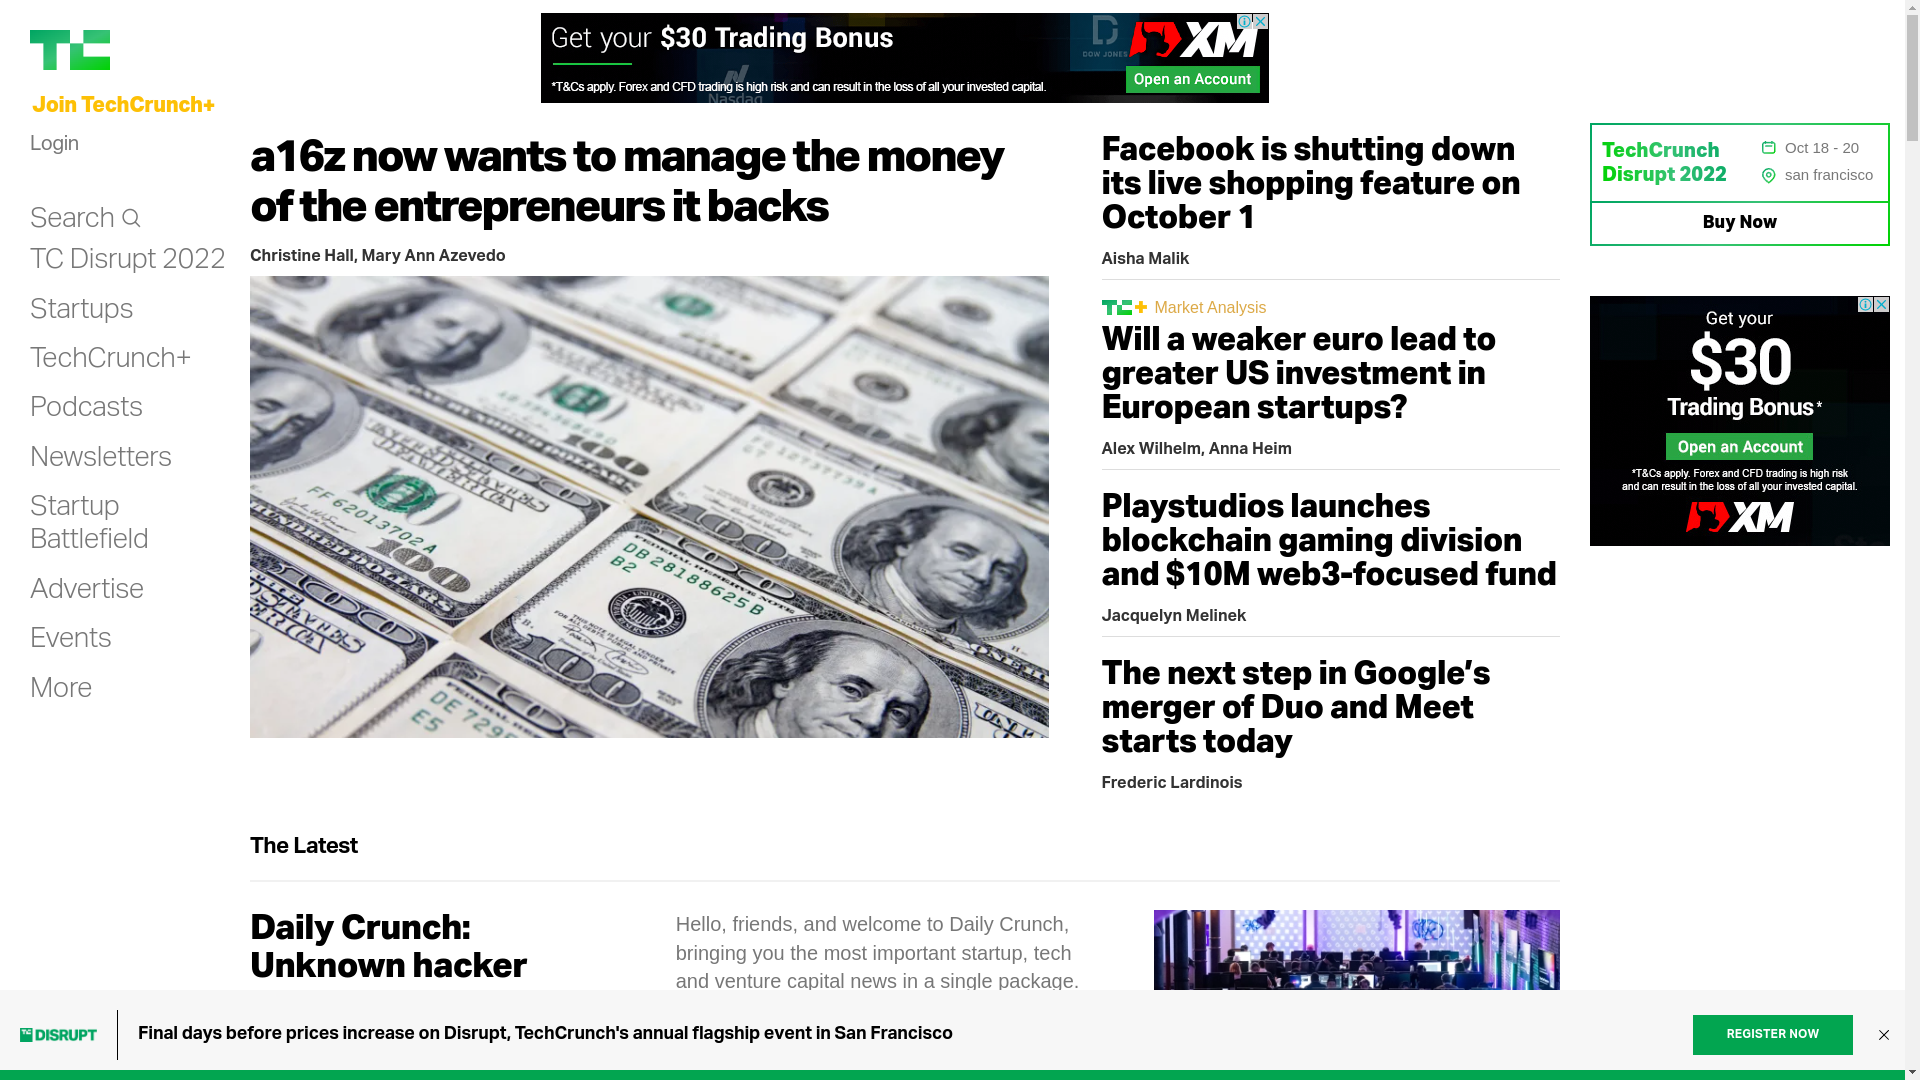 The TechCrunch homepage screenshotted using Playwright